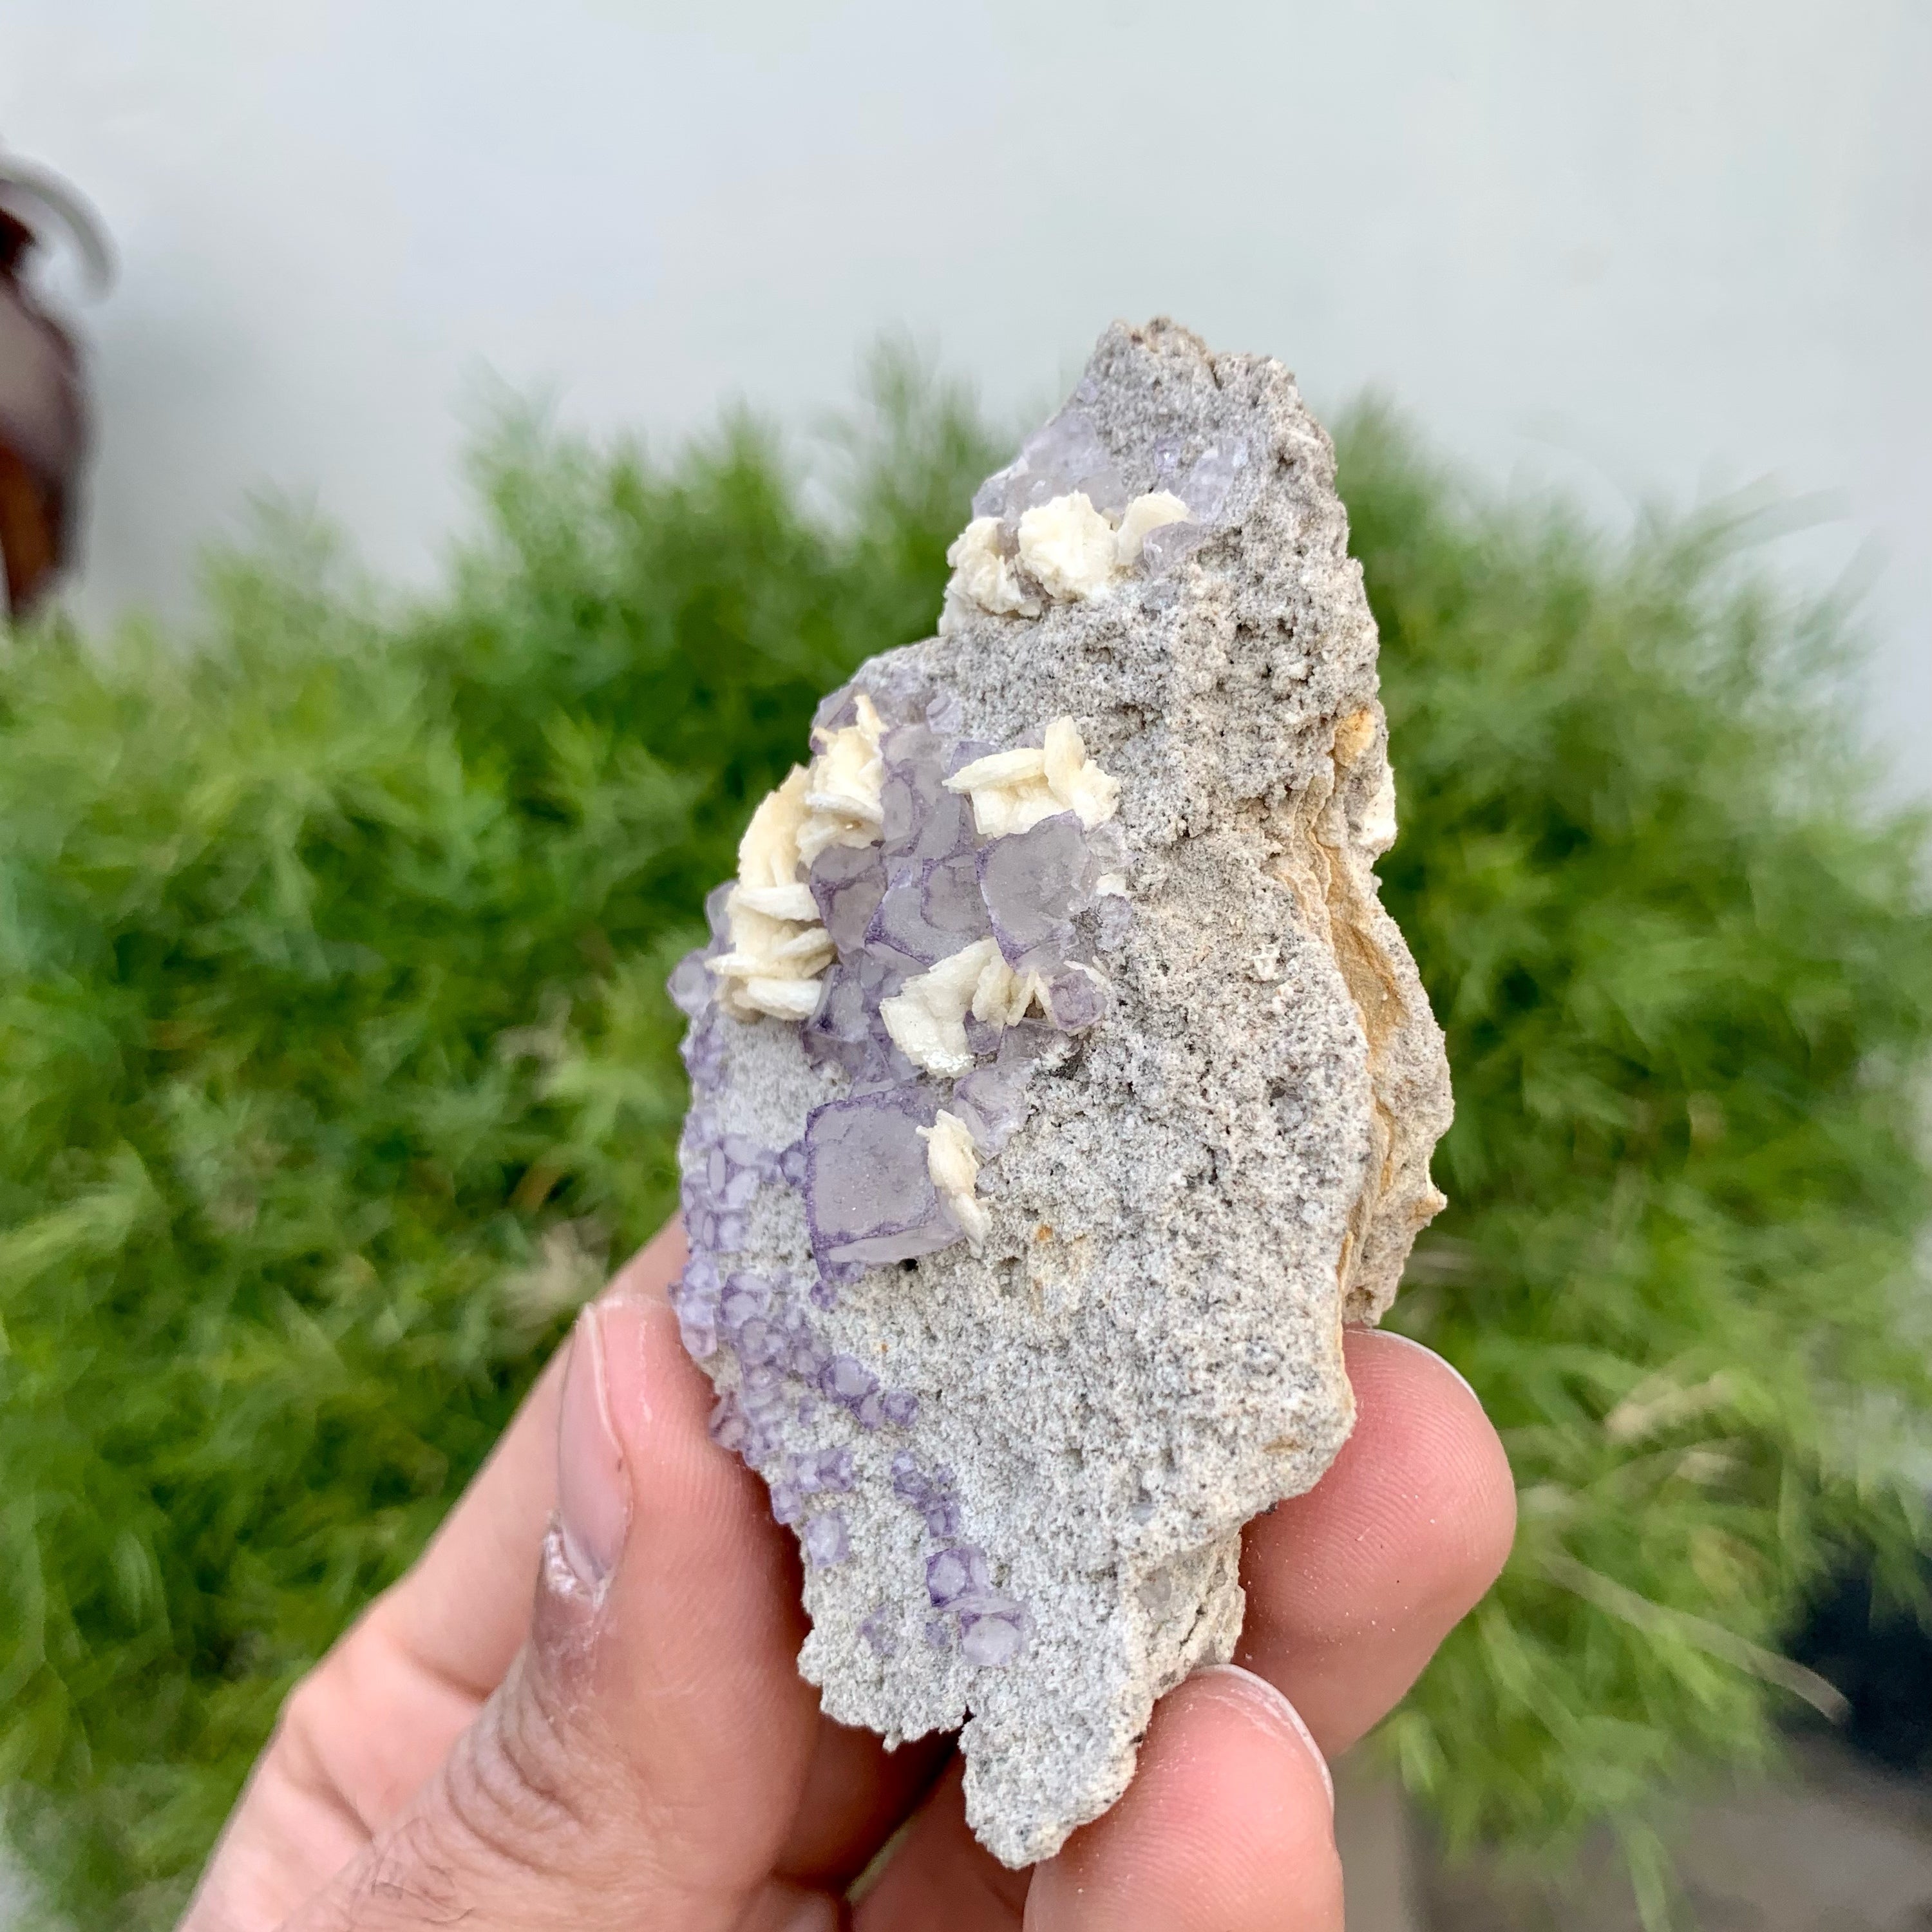 Lovely Fluorite Crystals Nicely Positioned On Matrix With Dolomite